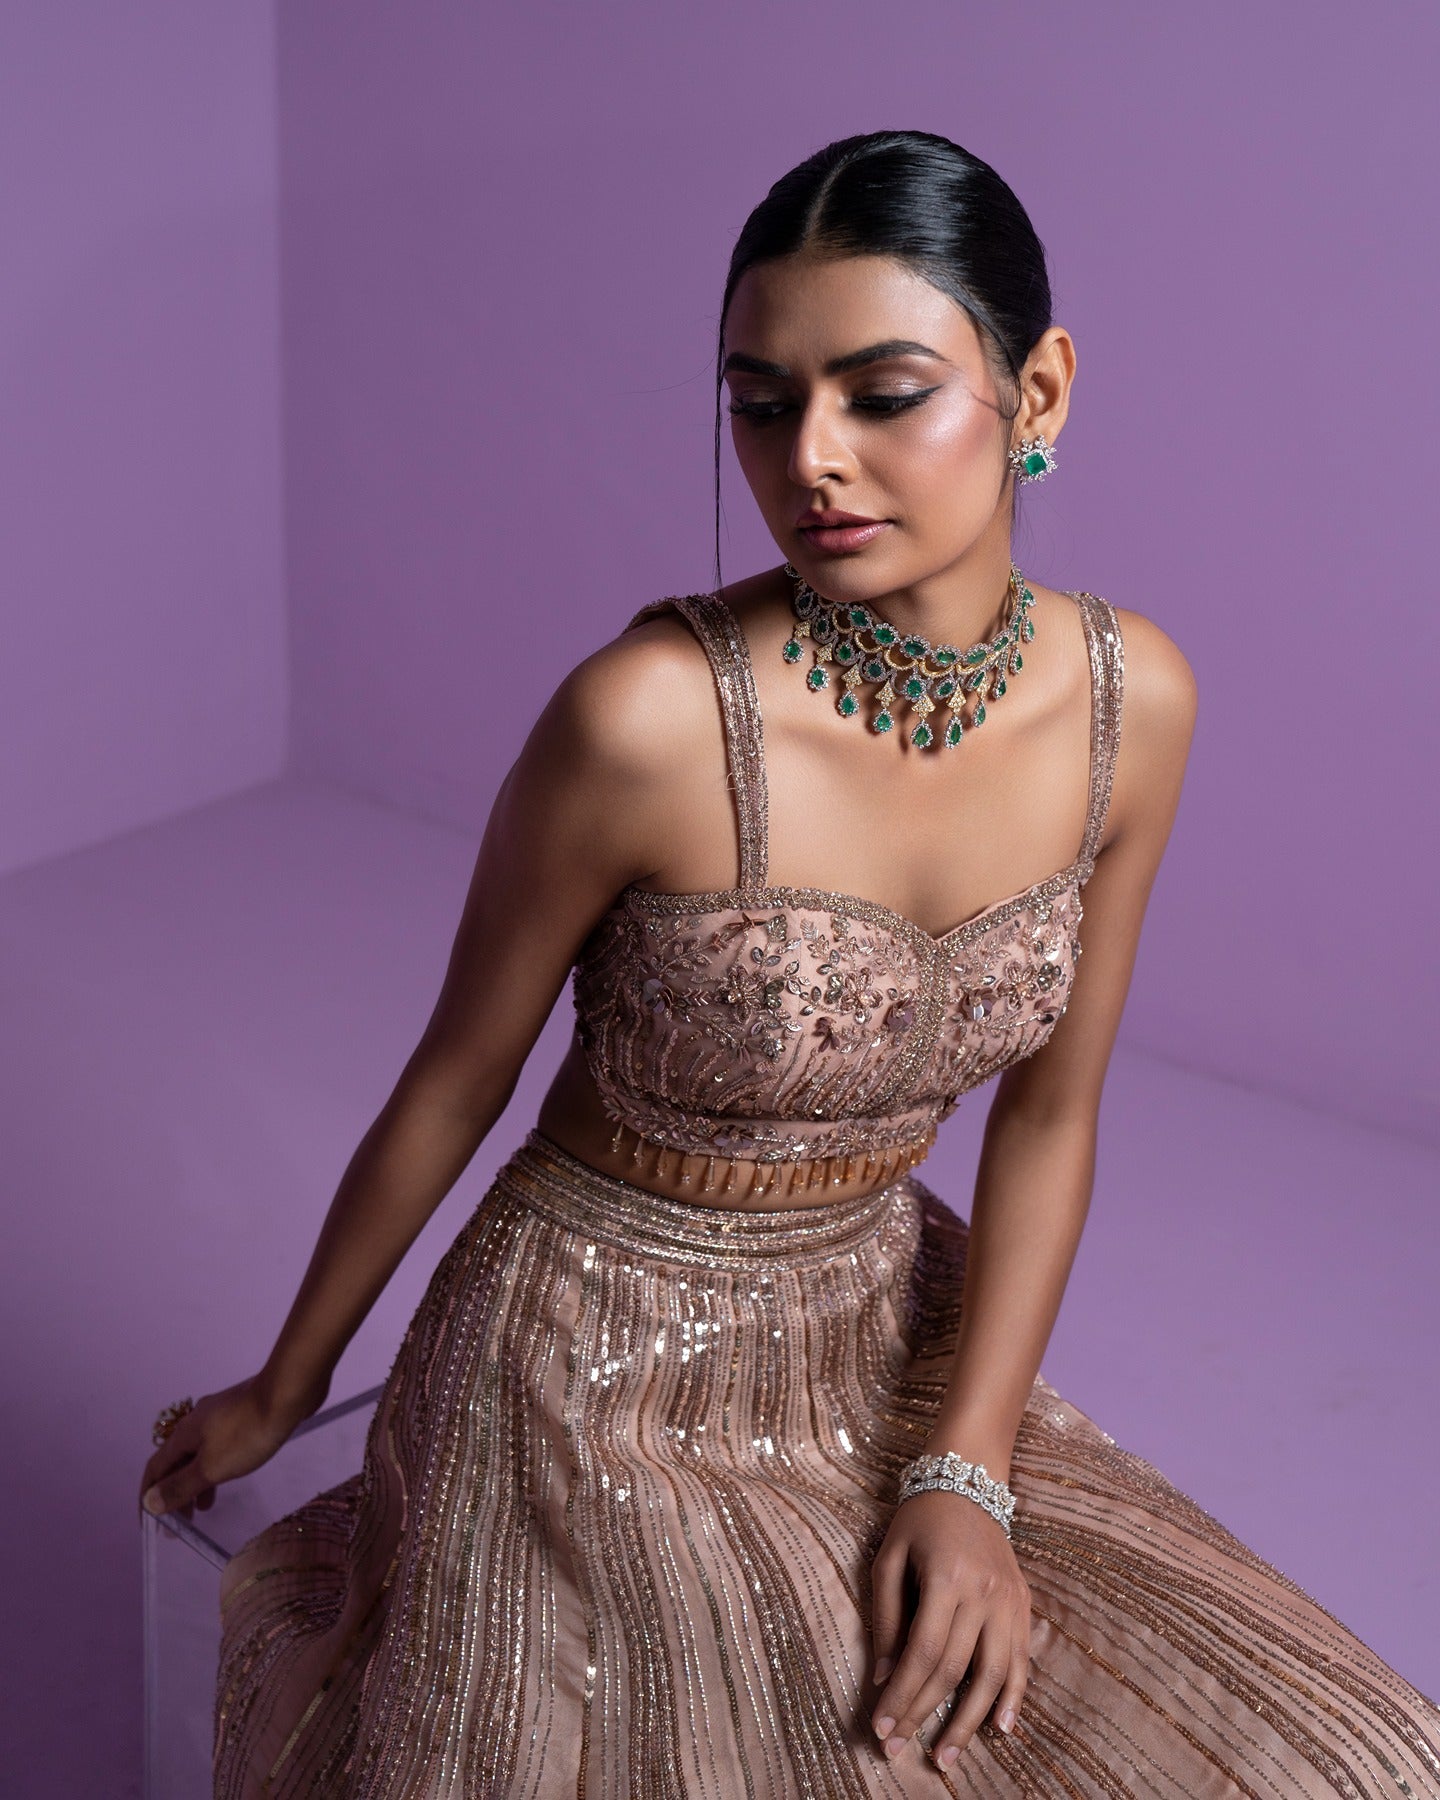 Draped in elegance and adorned in gold, this lehenga radiates timeless beauty and regal charm. A touch of glamour for moments that shimmer with splendor.